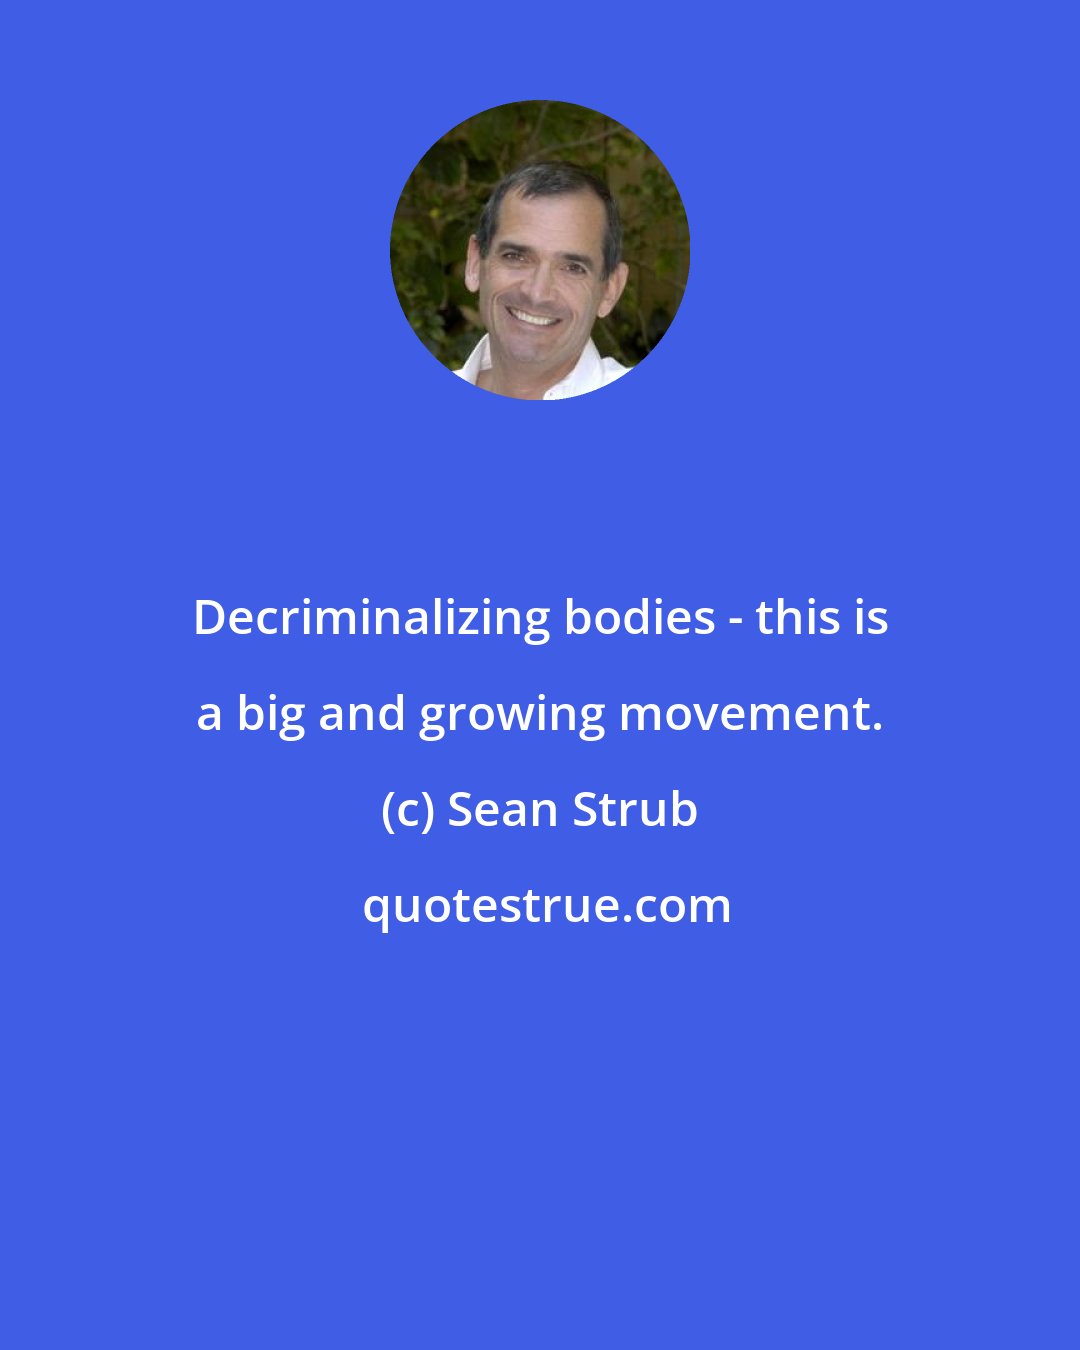 Sean Strub: Decriminalizing bodies - this is a big and growing movement.